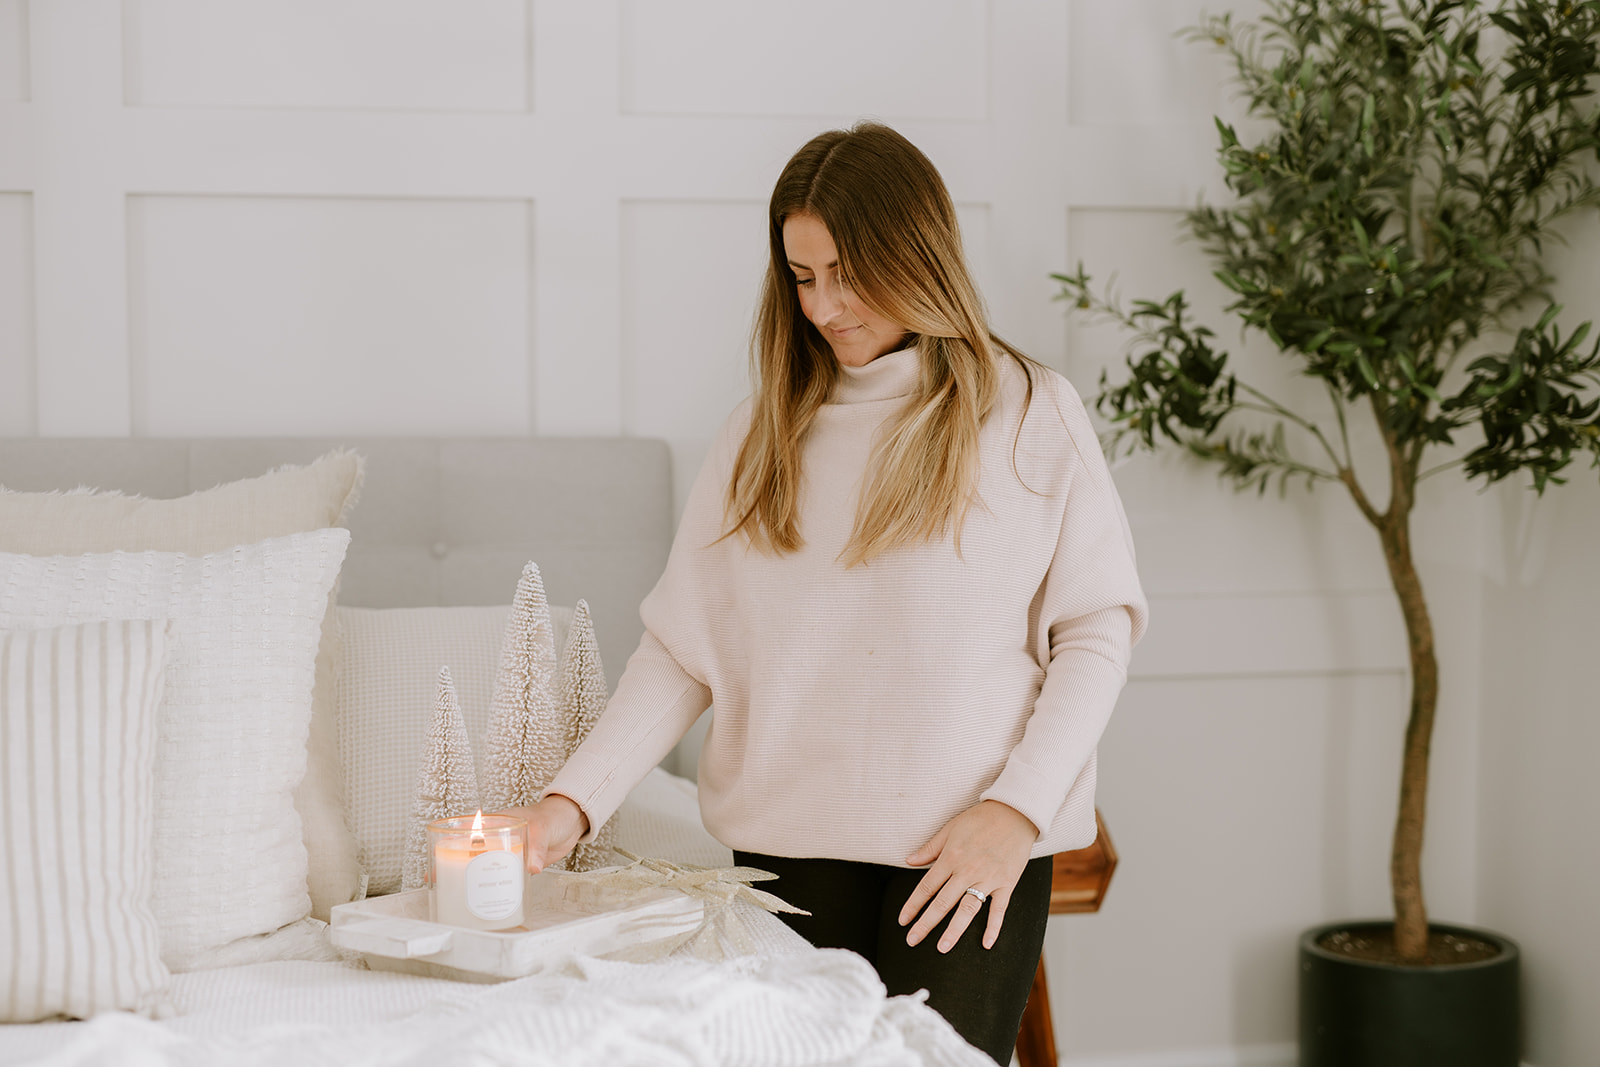 woman placing candle on tray in bedroom